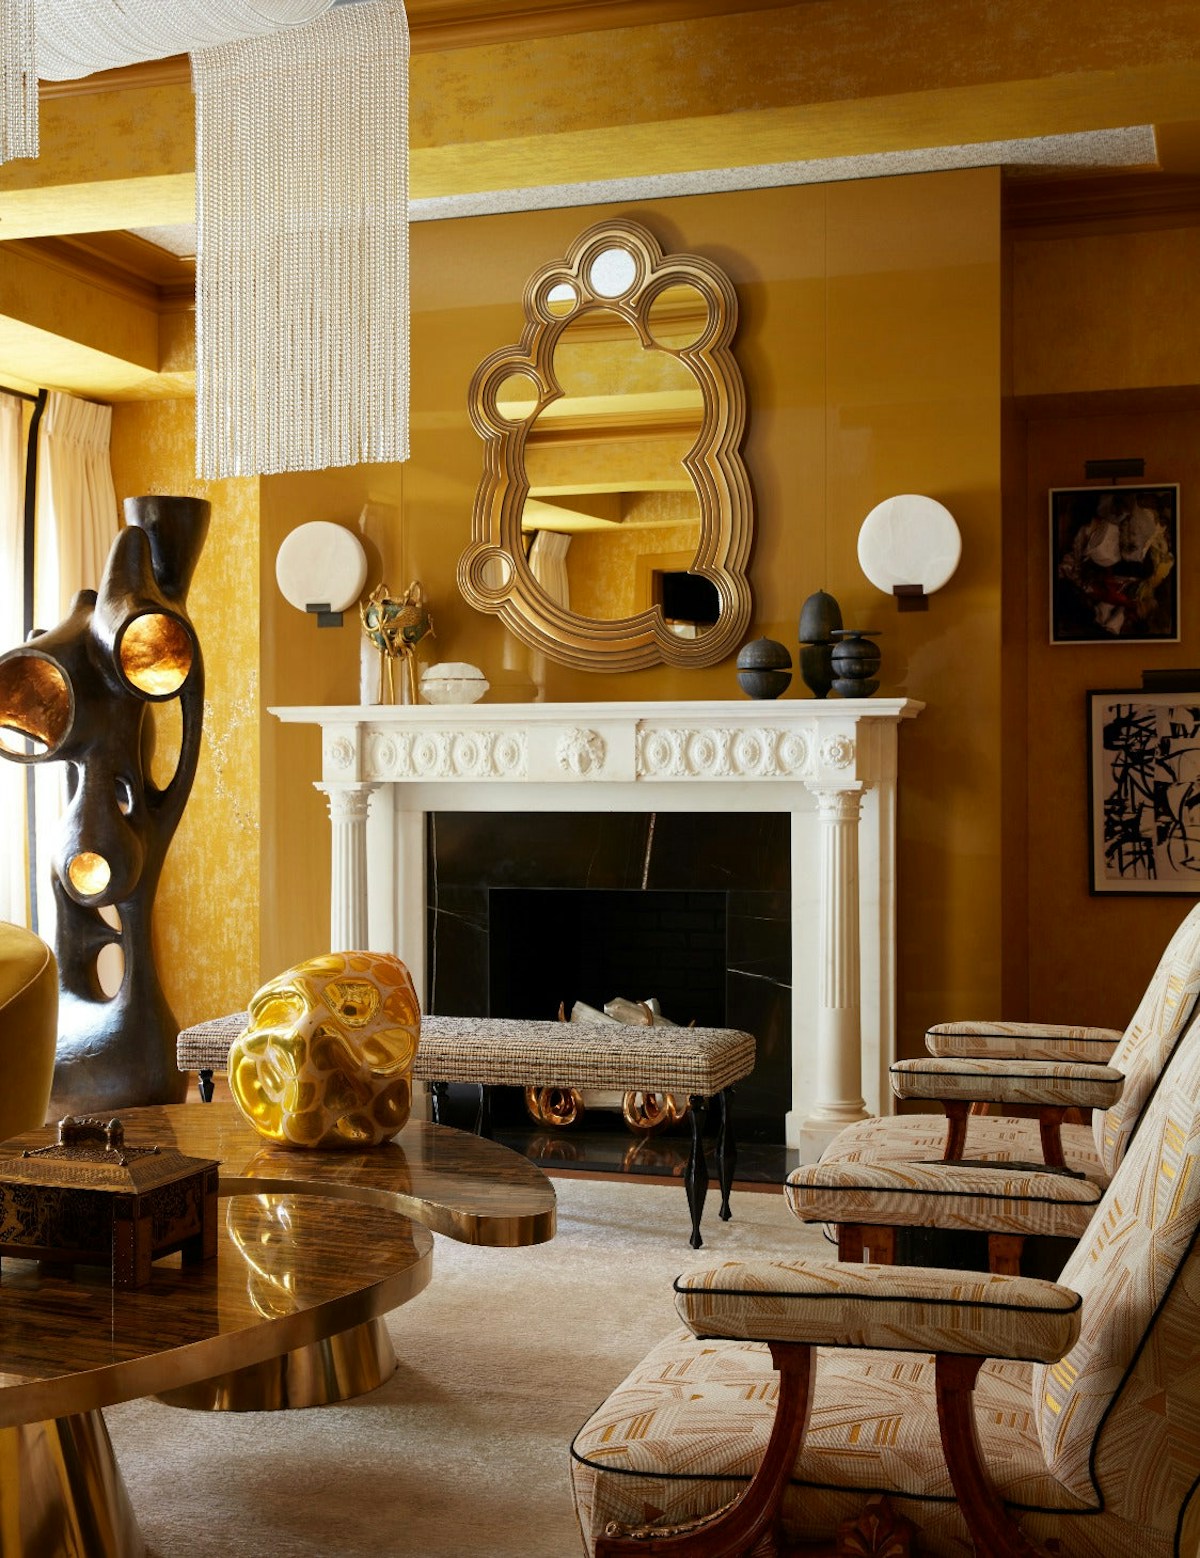 Best Yellow Living Room Ideas | Yellow Living Room Accessories | Decorating with Yellow | LuxDeco.com Style Guide